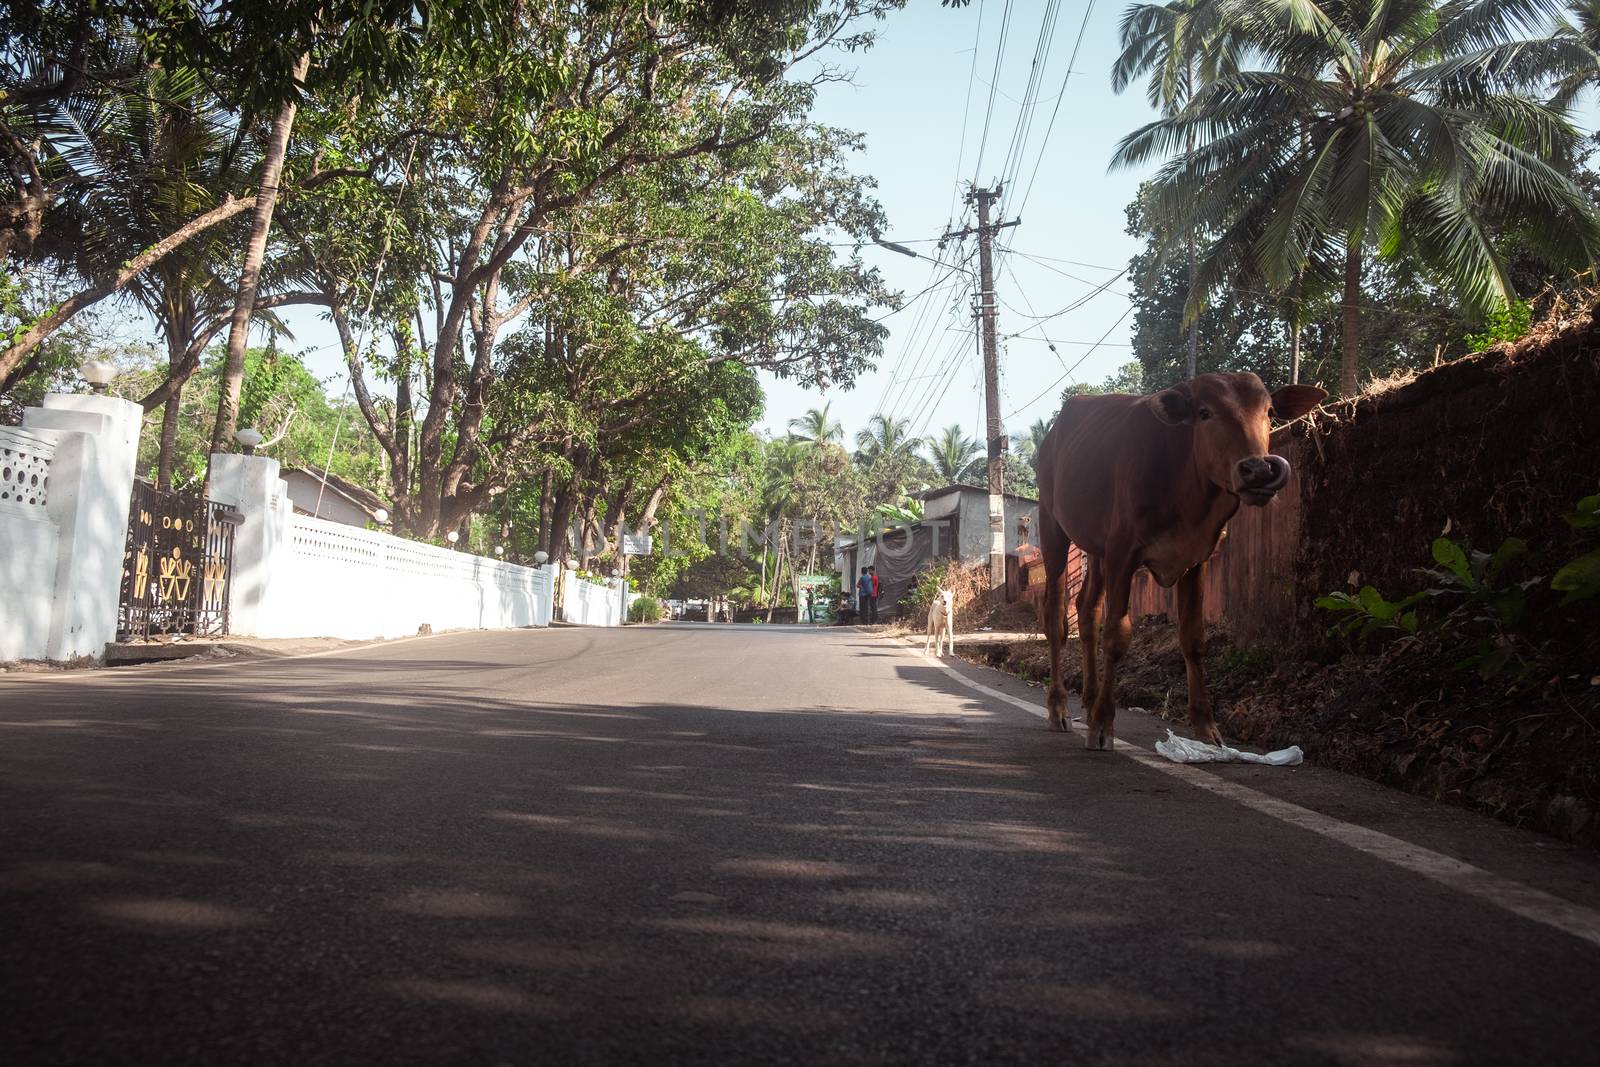 Cow Walking On Road Amidst Trees